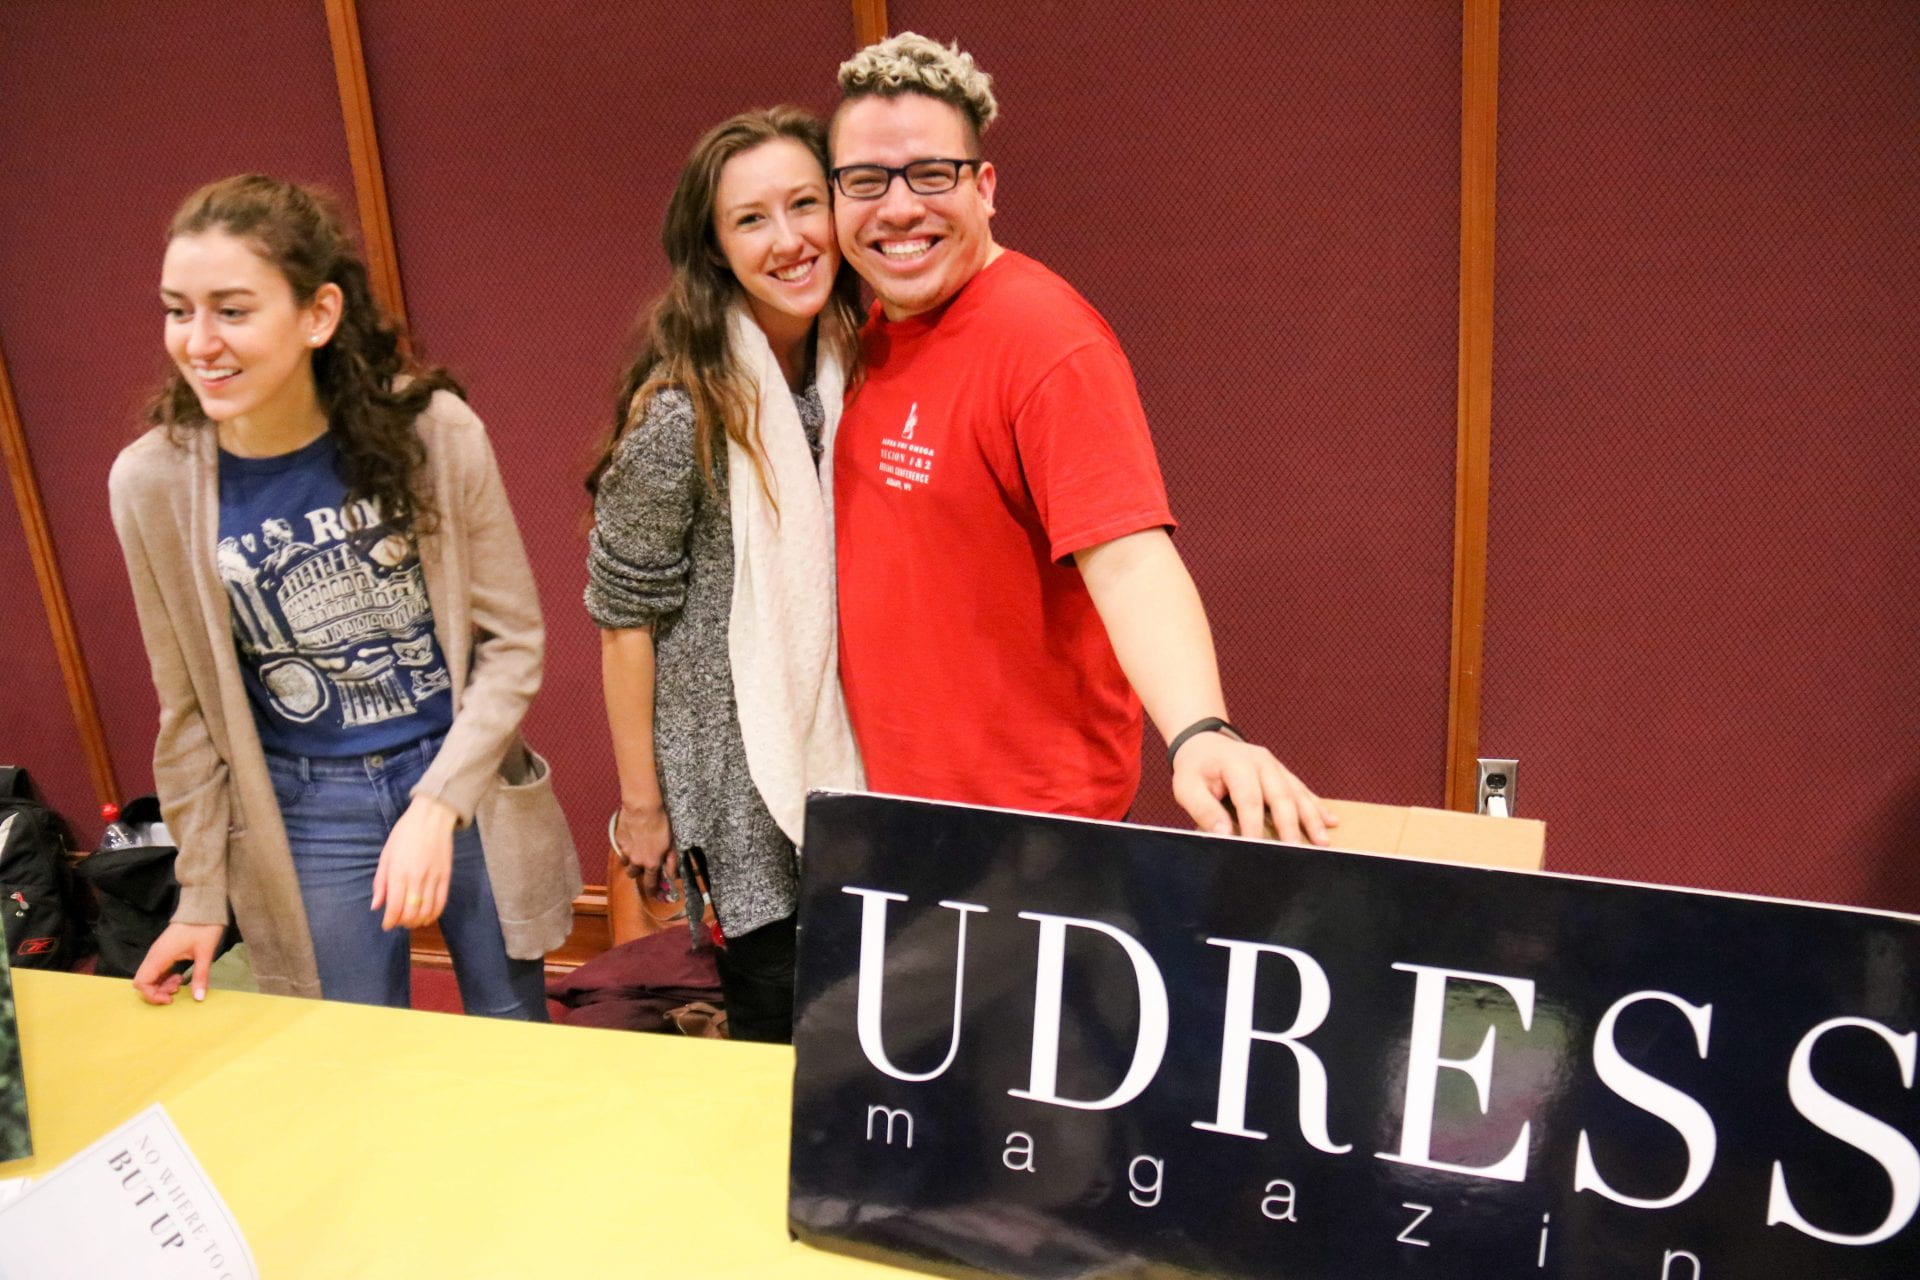 UDress Magazine table at Spring Activities Night